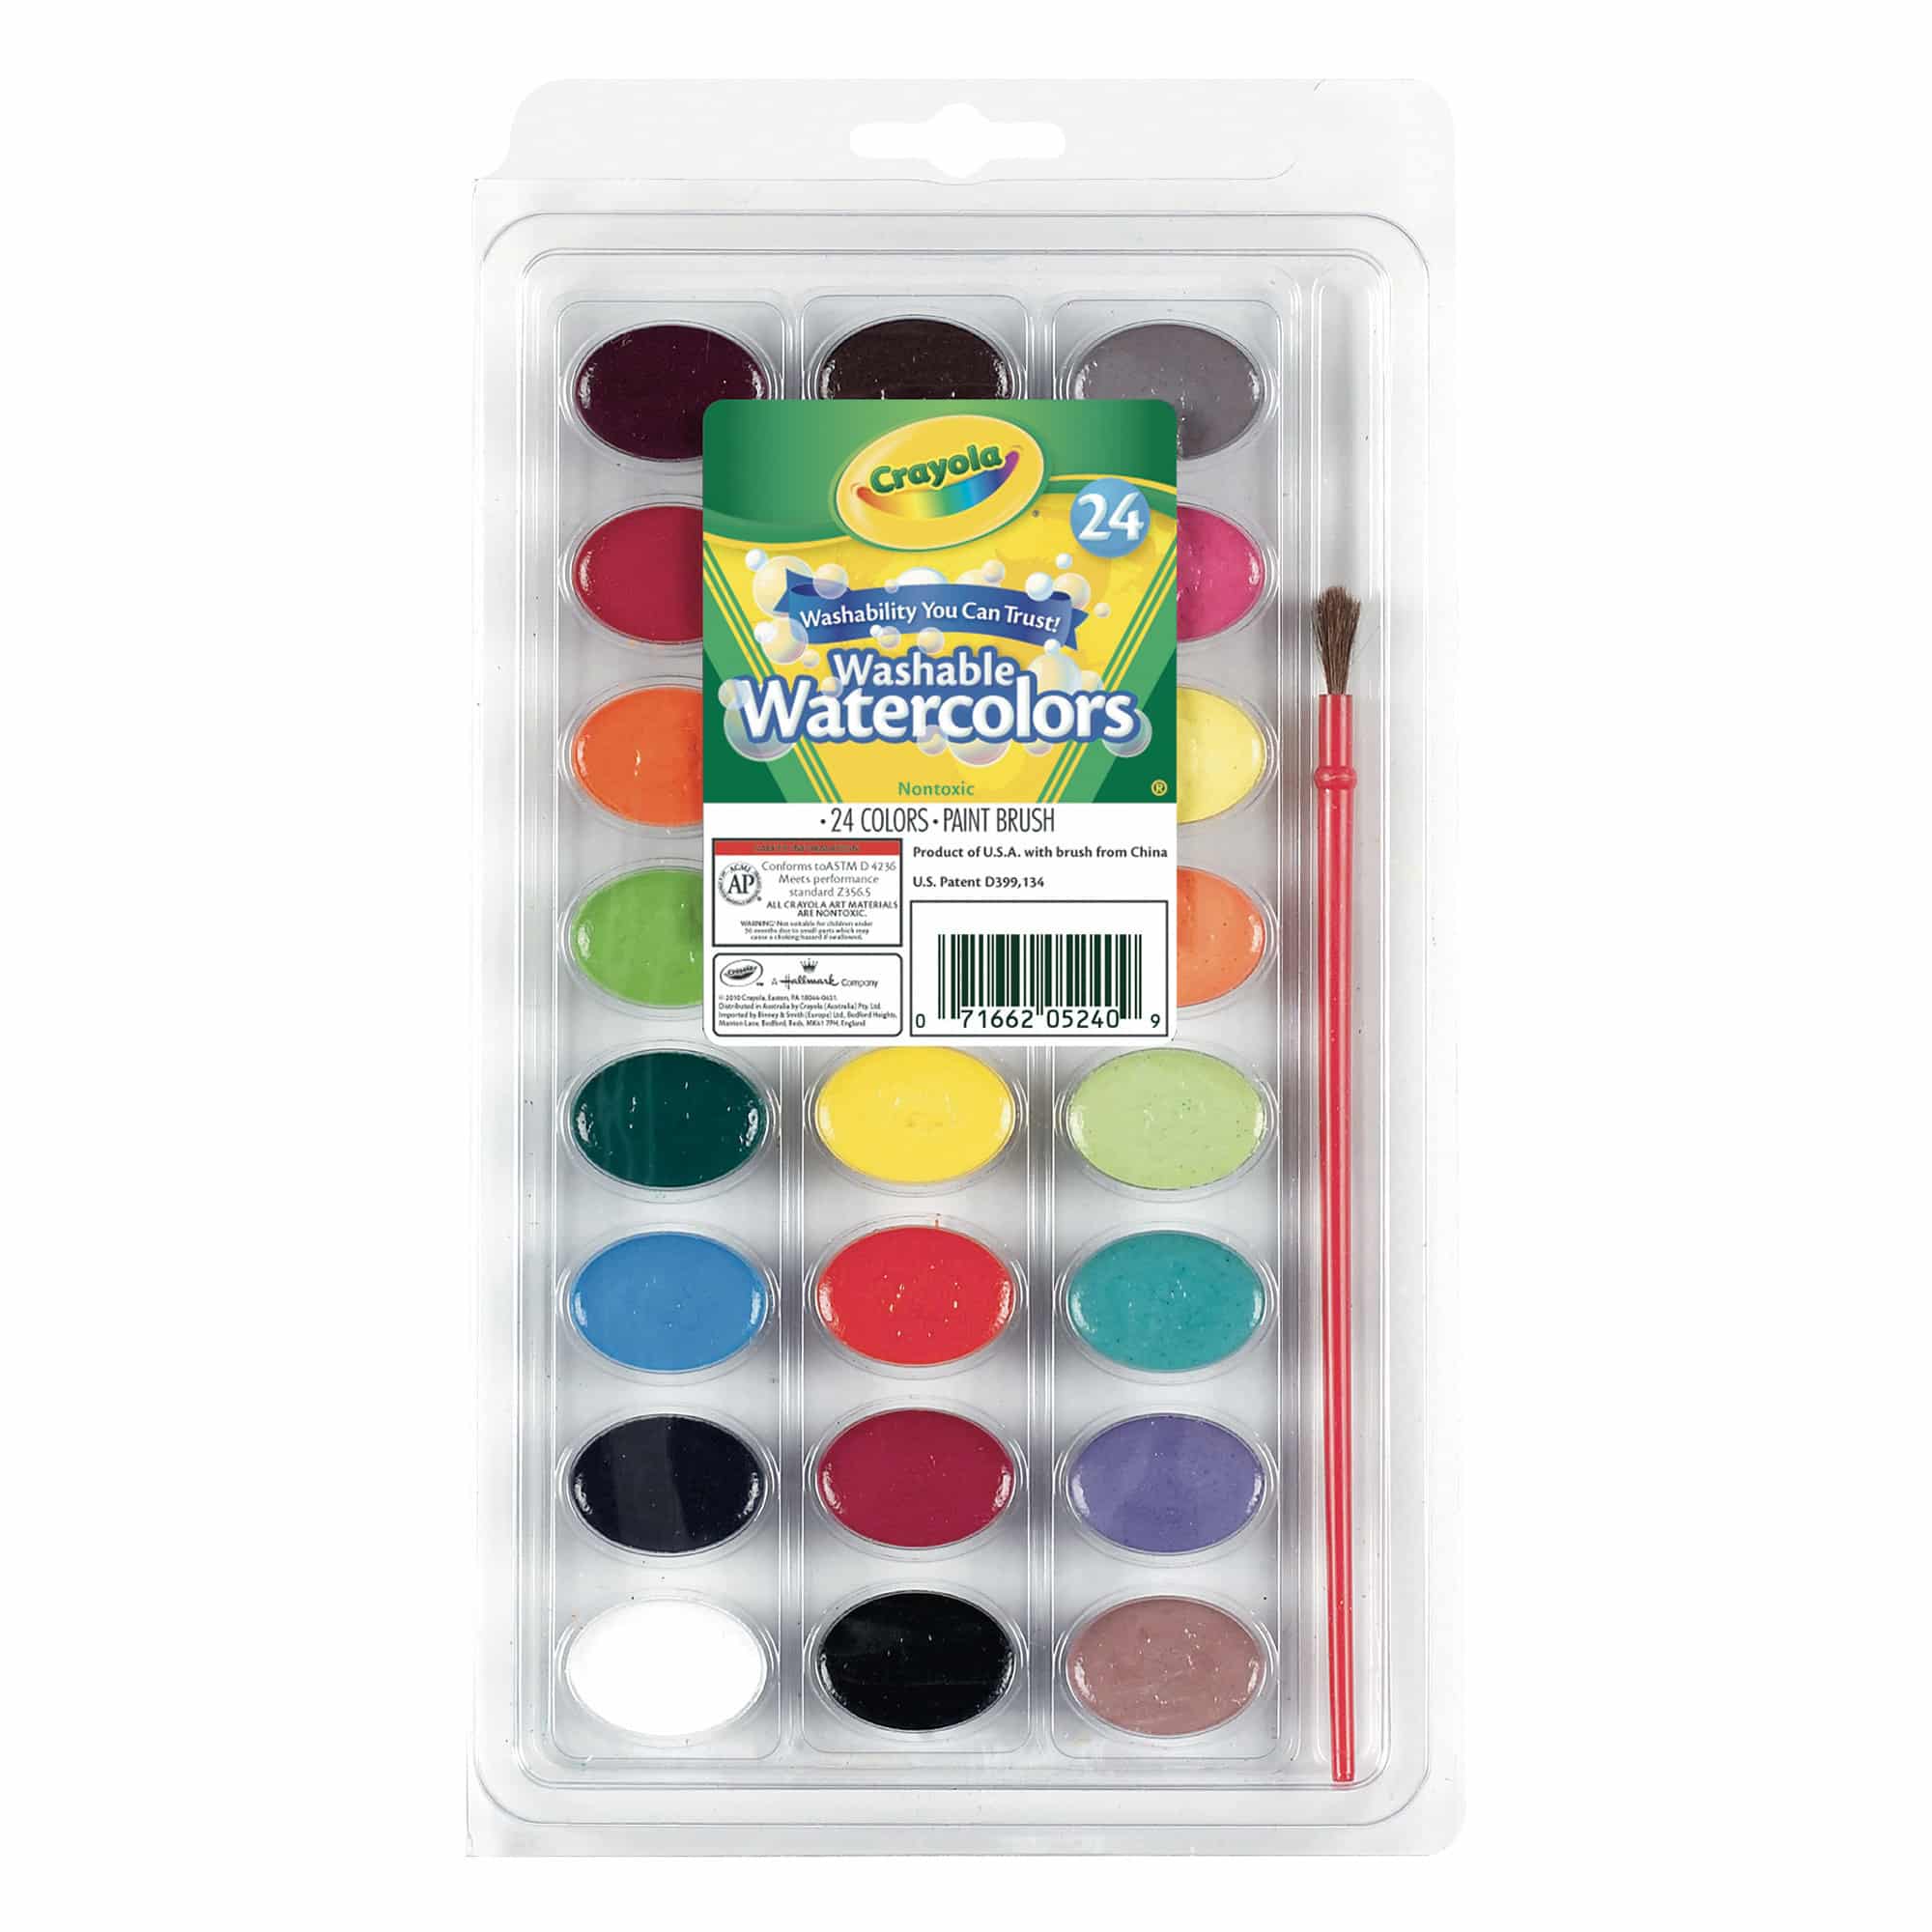 Crayola Washable Watercolors and Brush - 24 Colours